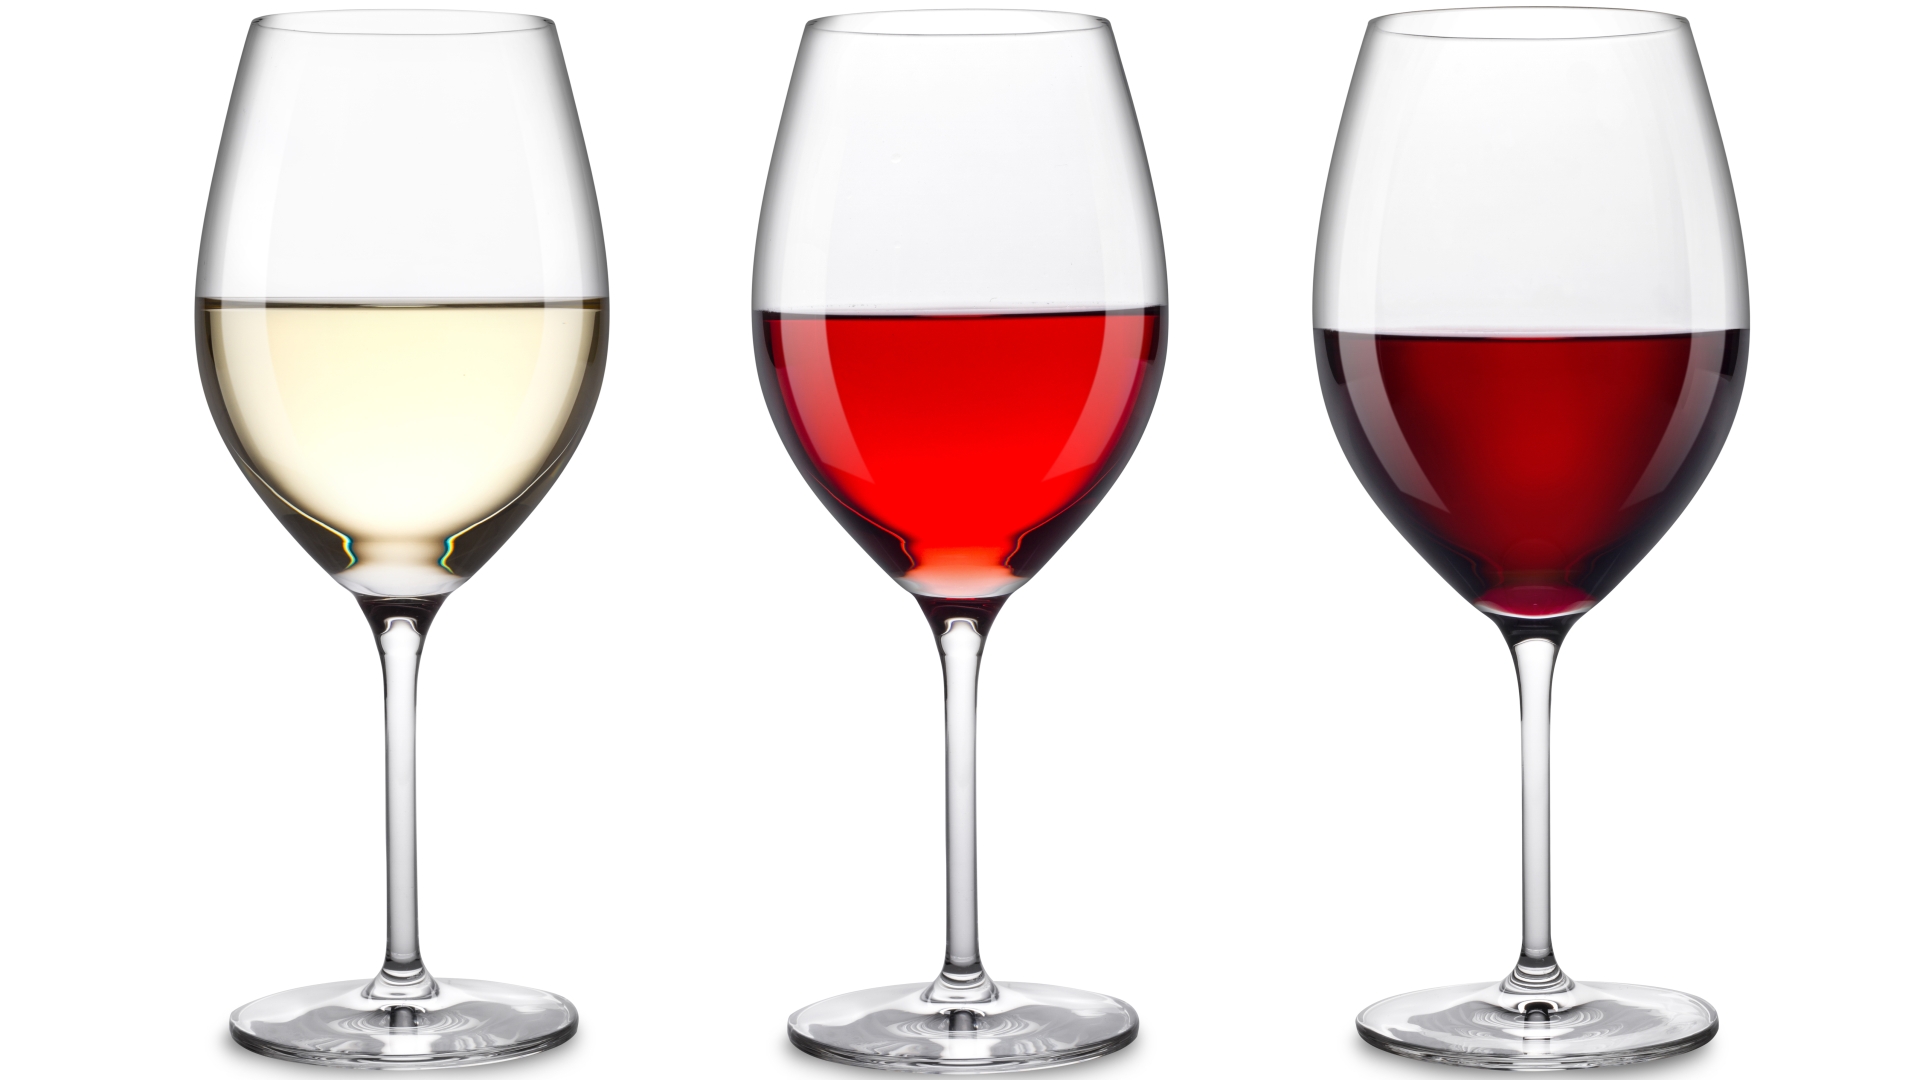 Mum asks if she ‘has a problem’ For 3 glasses of wine per night, experts agree.